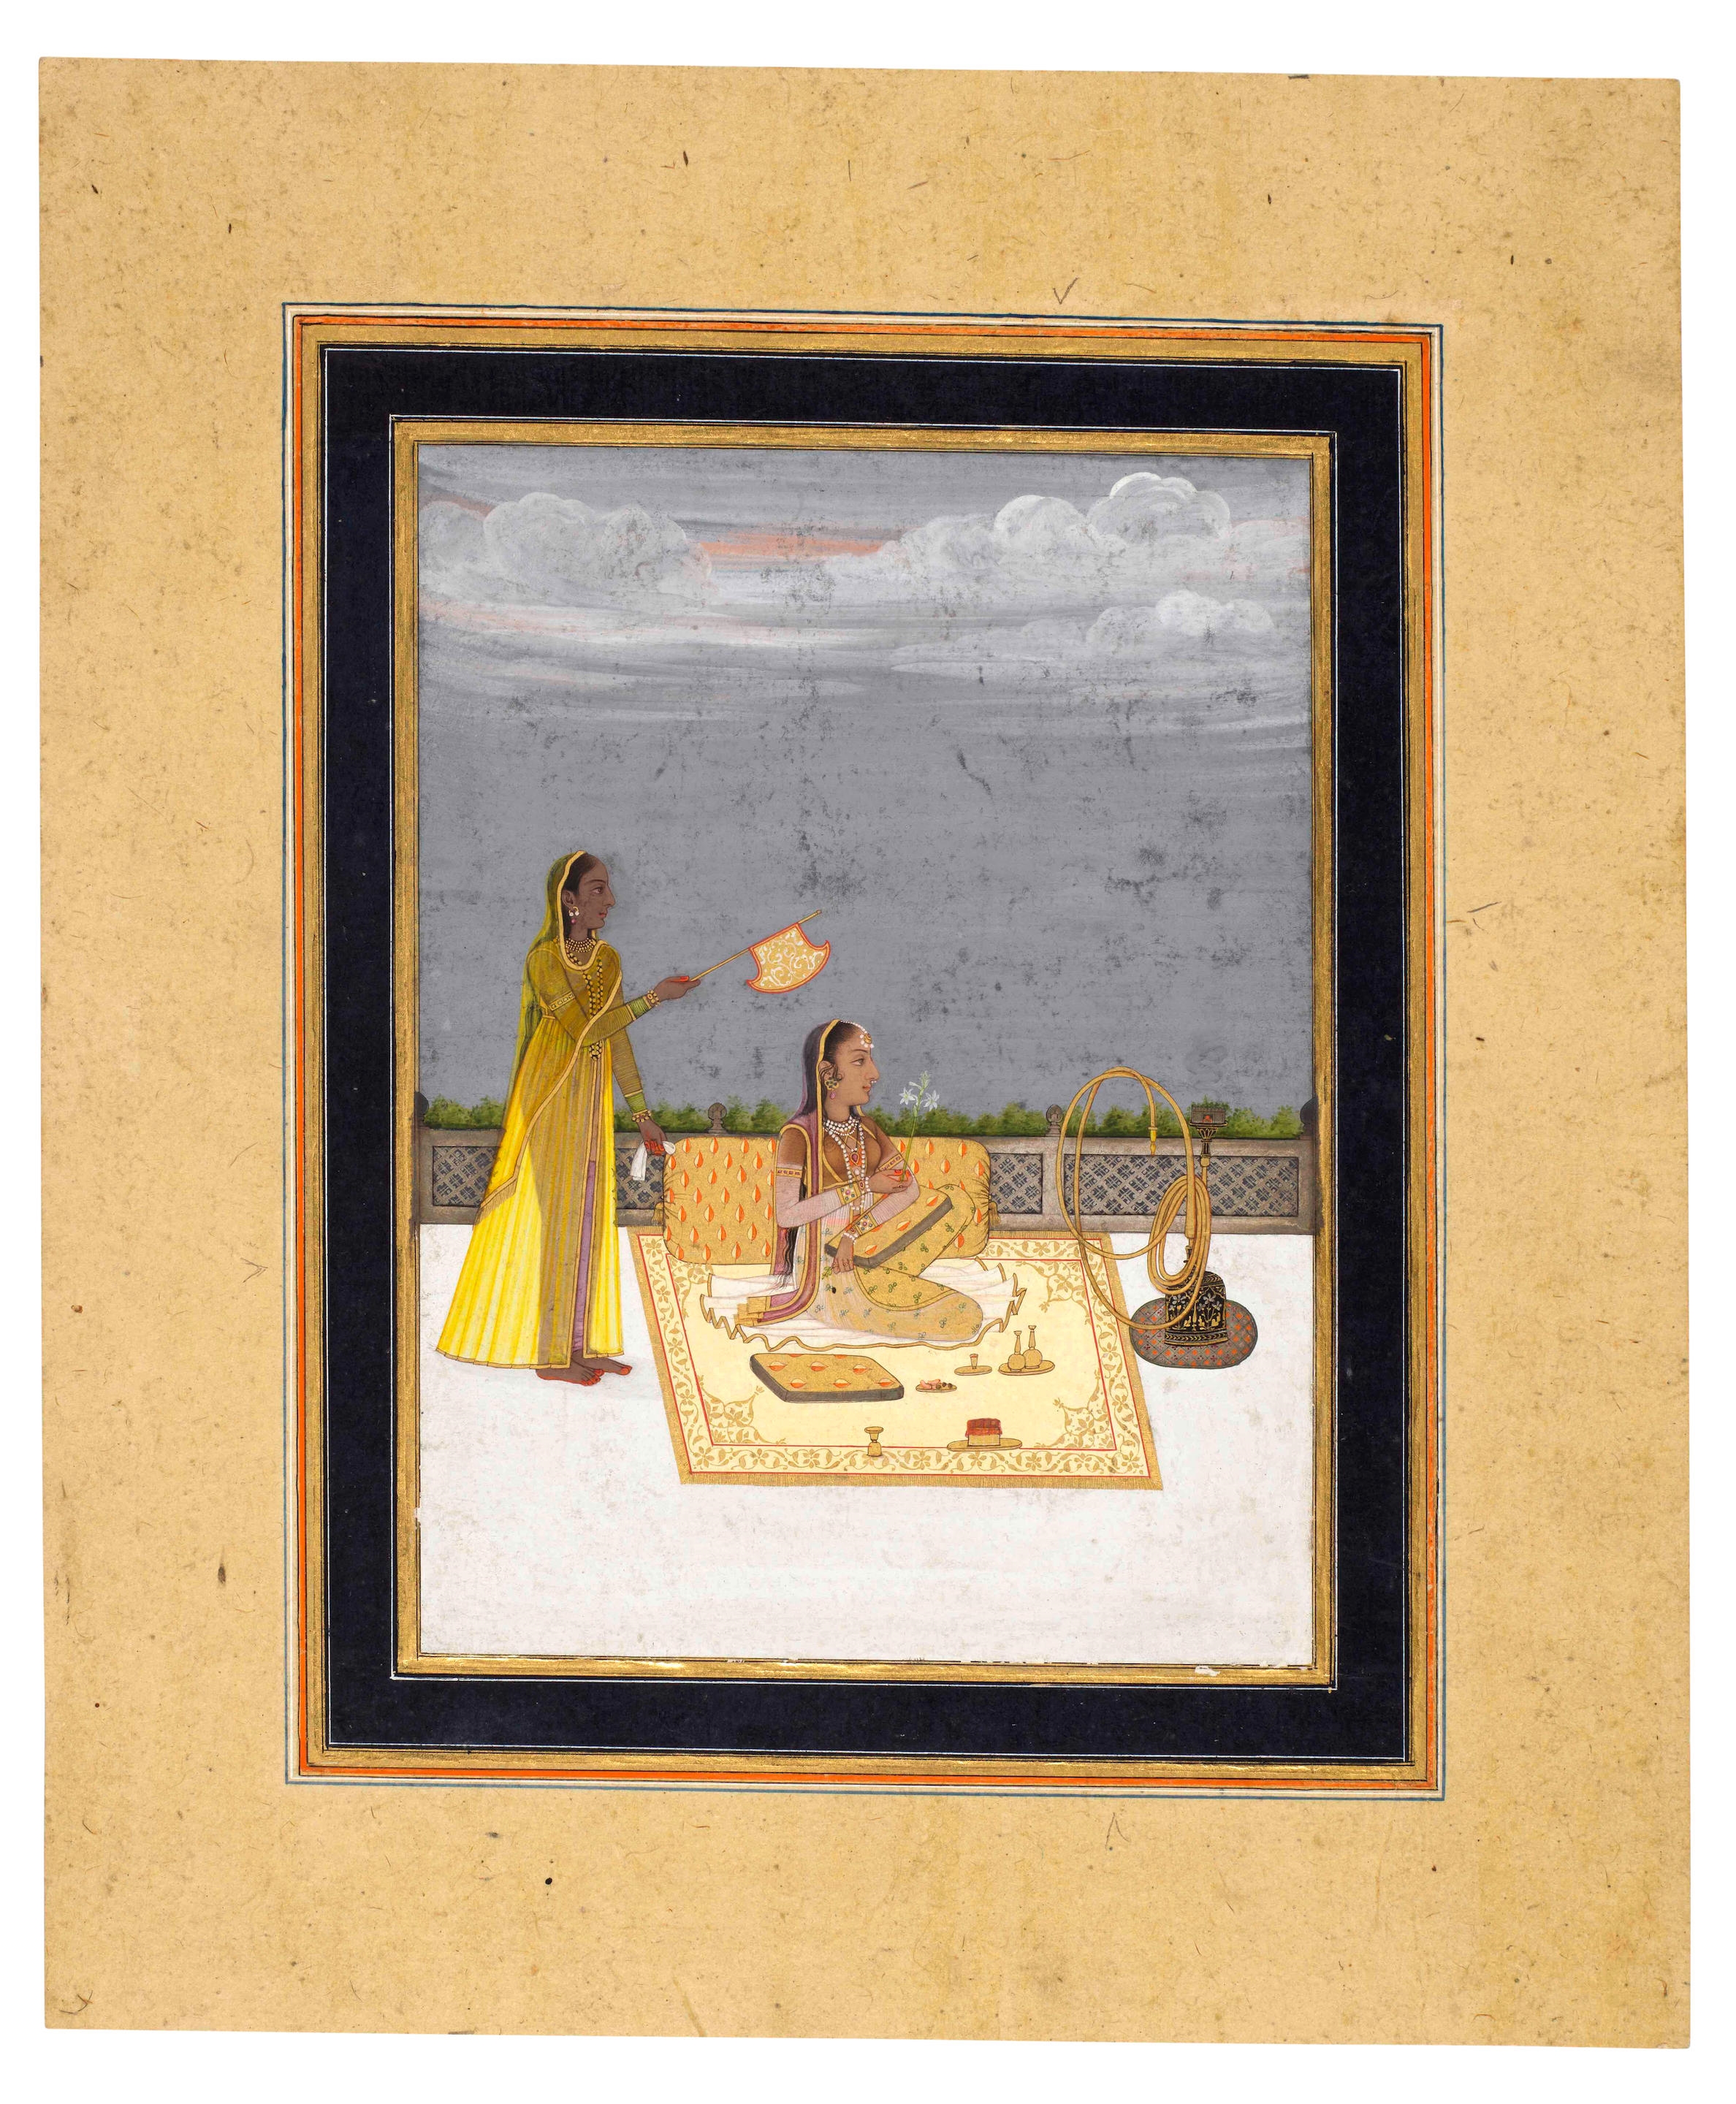 A lady seated on a terrace holding a narcissus, with an attendant - Muhammad Reza-i-Hindi